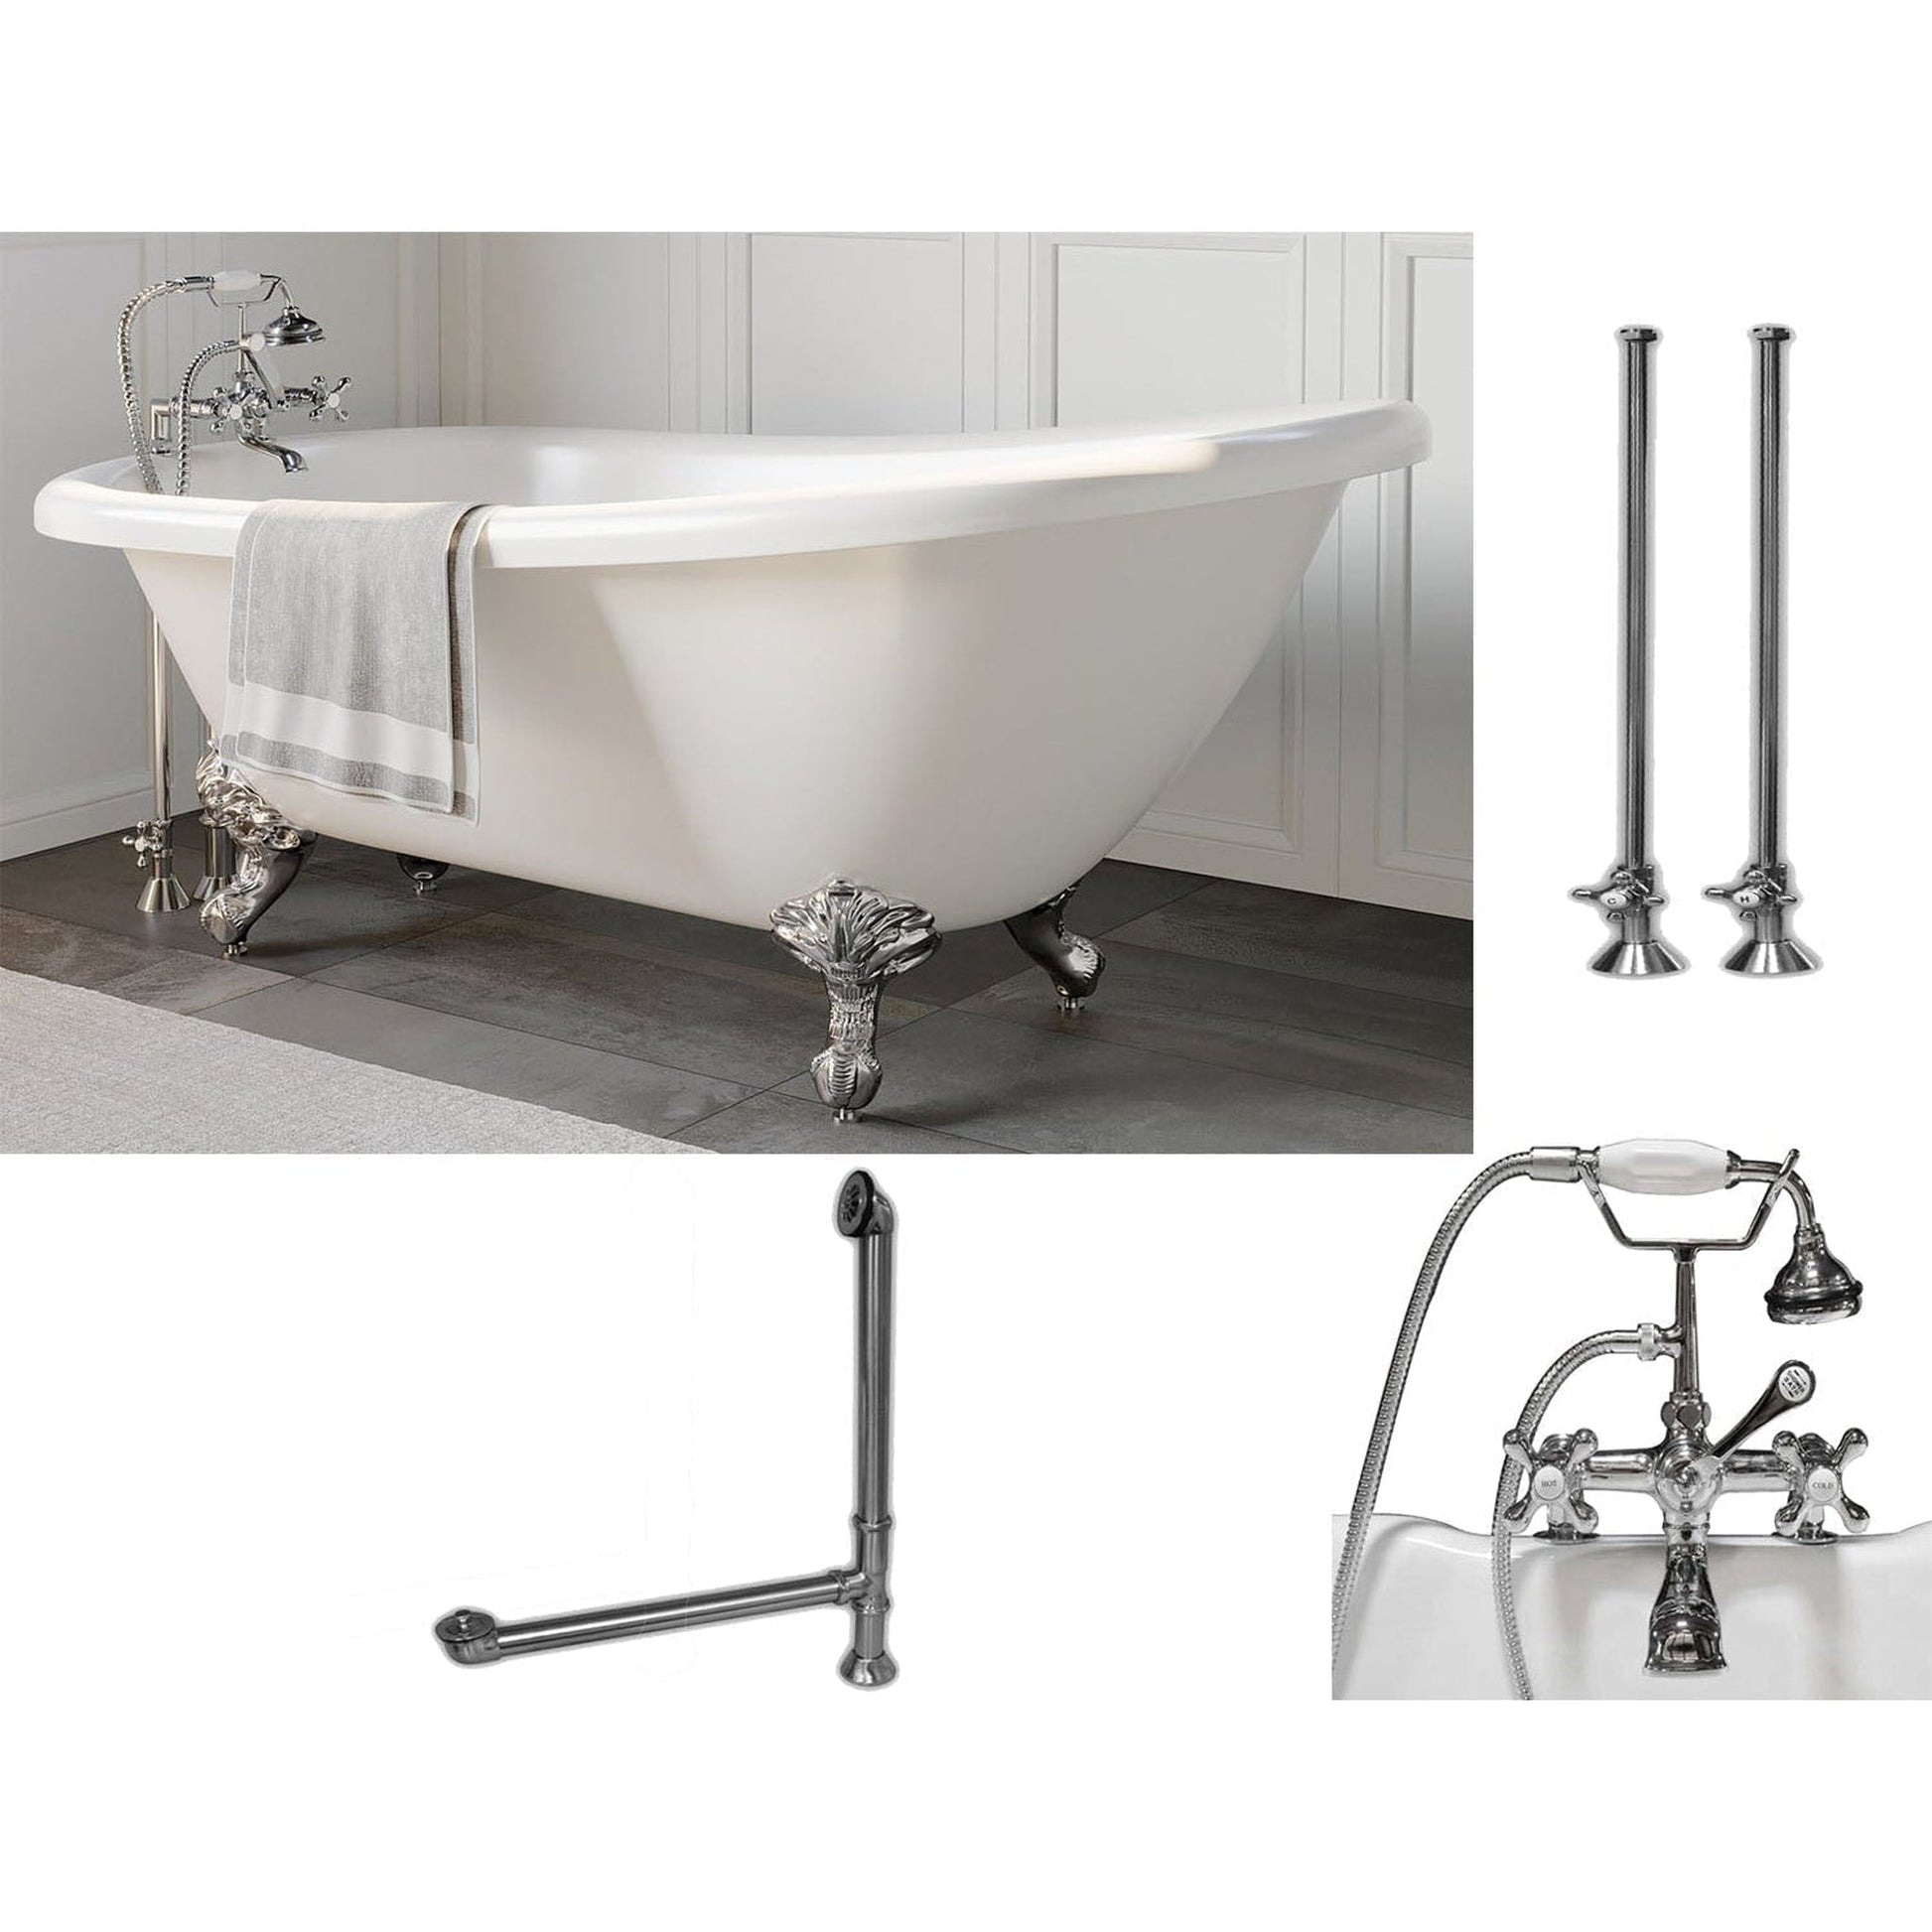 Cambridge Plumbing 67" White Acrylic Single Slipper Clawfeet Bathtub With Deck Holes And Complete Plumbing Package Including 2” Riser Deck Mount Faucet, Supply Lines, Drain And Overflow Assembly In Polished Chrome